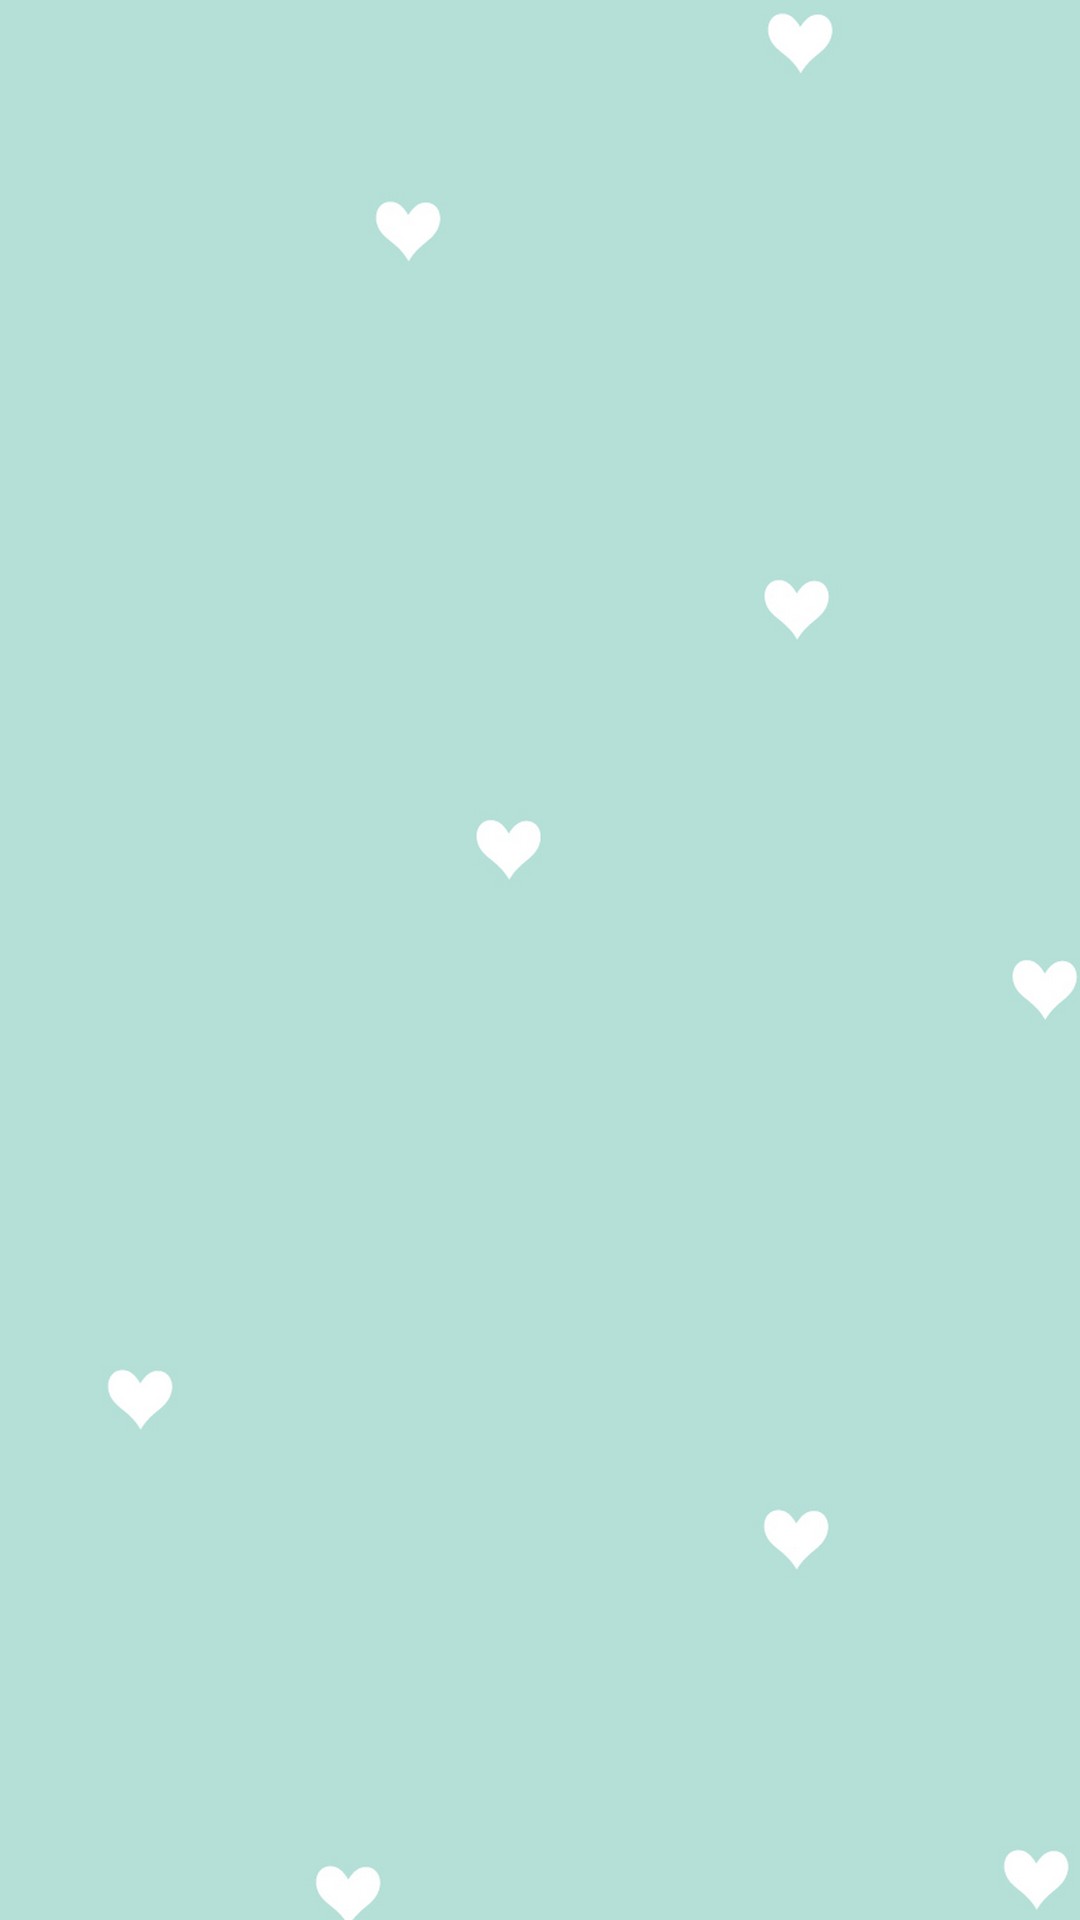 Mint Green HD Wallpapers For Android with image resolution 1080x1920 pixel. You can make this wallpaper for your Android backgrounds, Tablet, Smartphones Screensavers and Mobile Phone Lock Screen